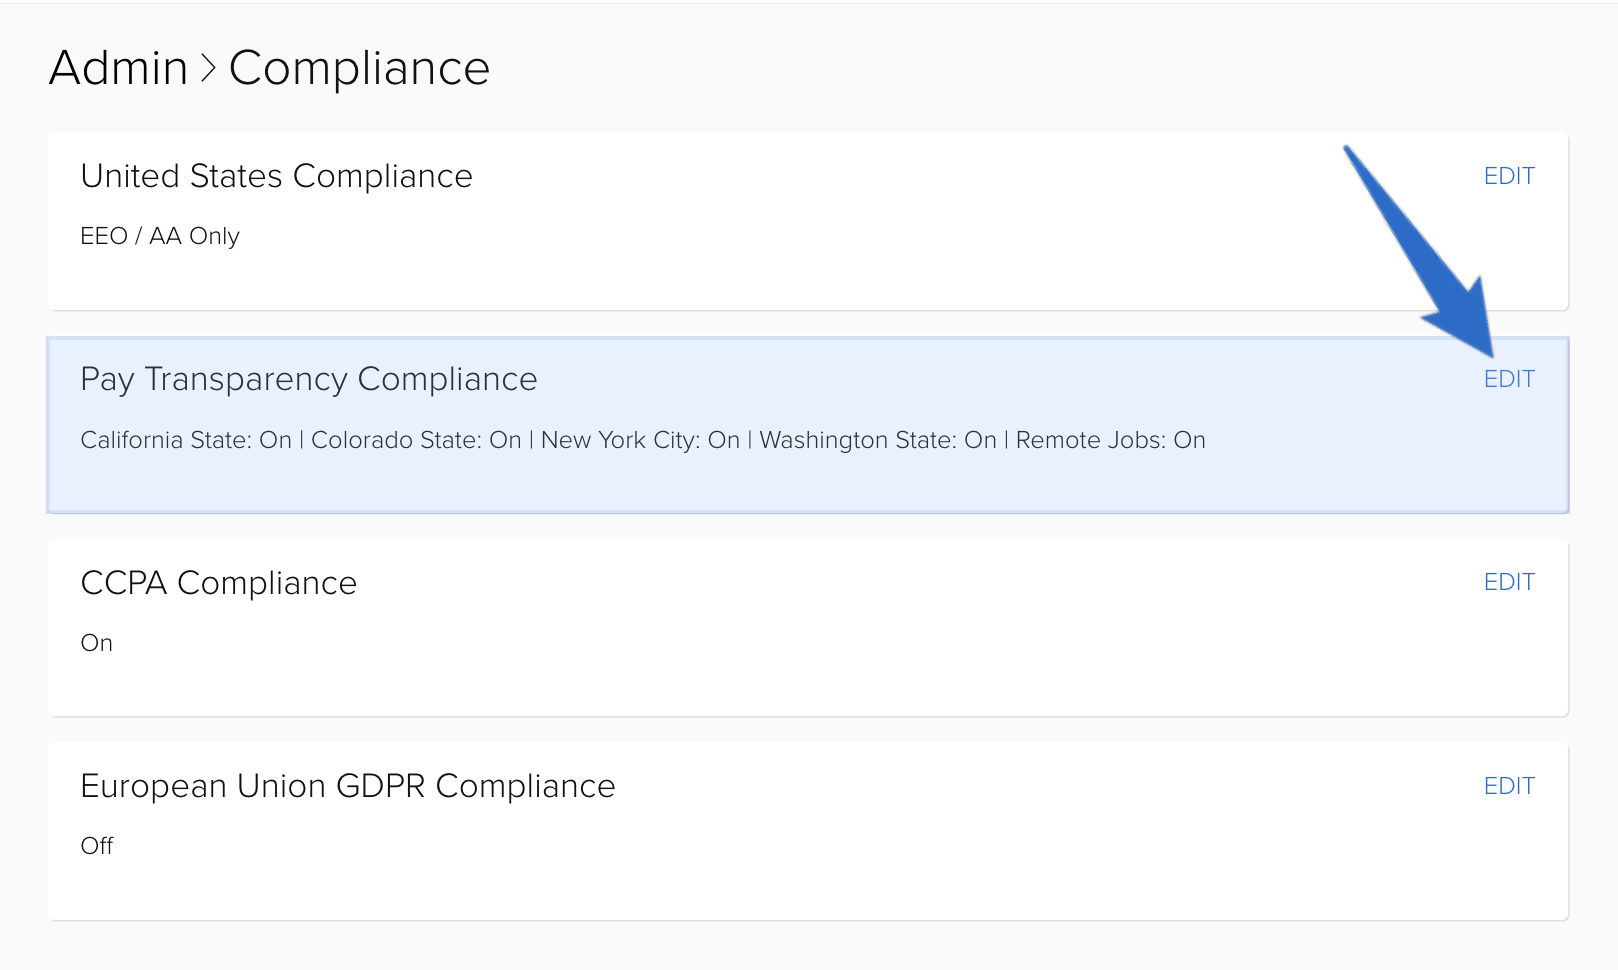 Control pay transparency compliance